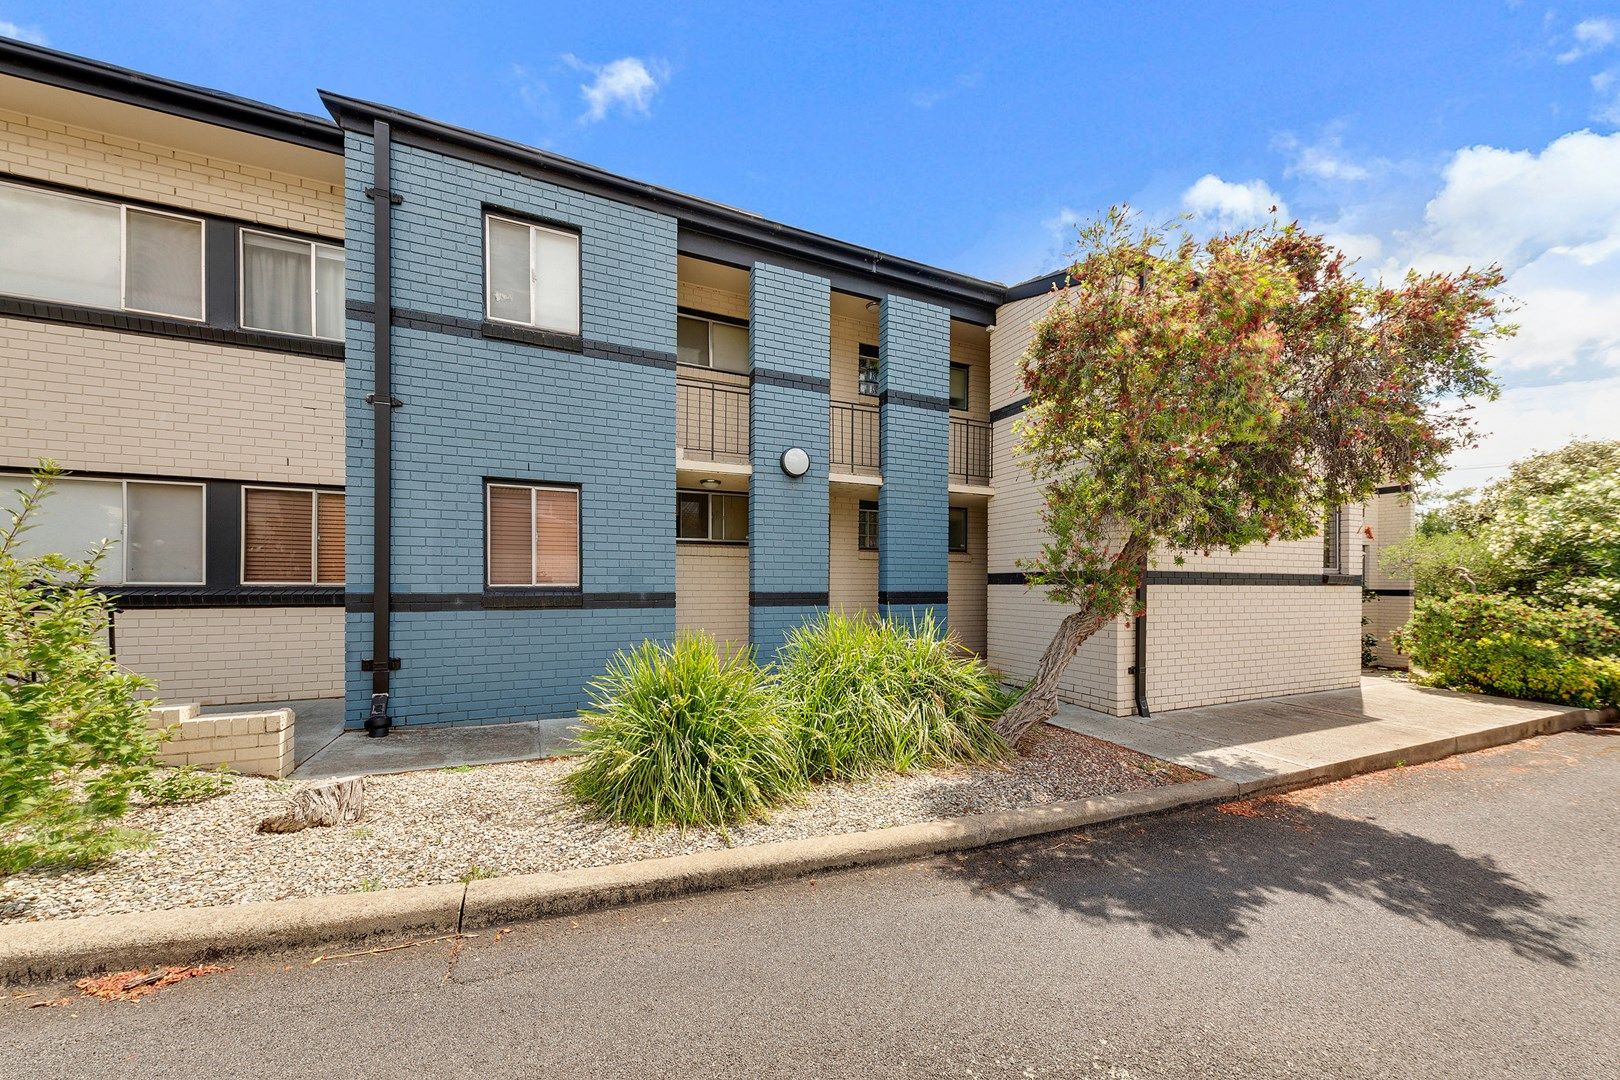 10/58 Bennelong Crescent, Macquarie ACT 2614, Image 0